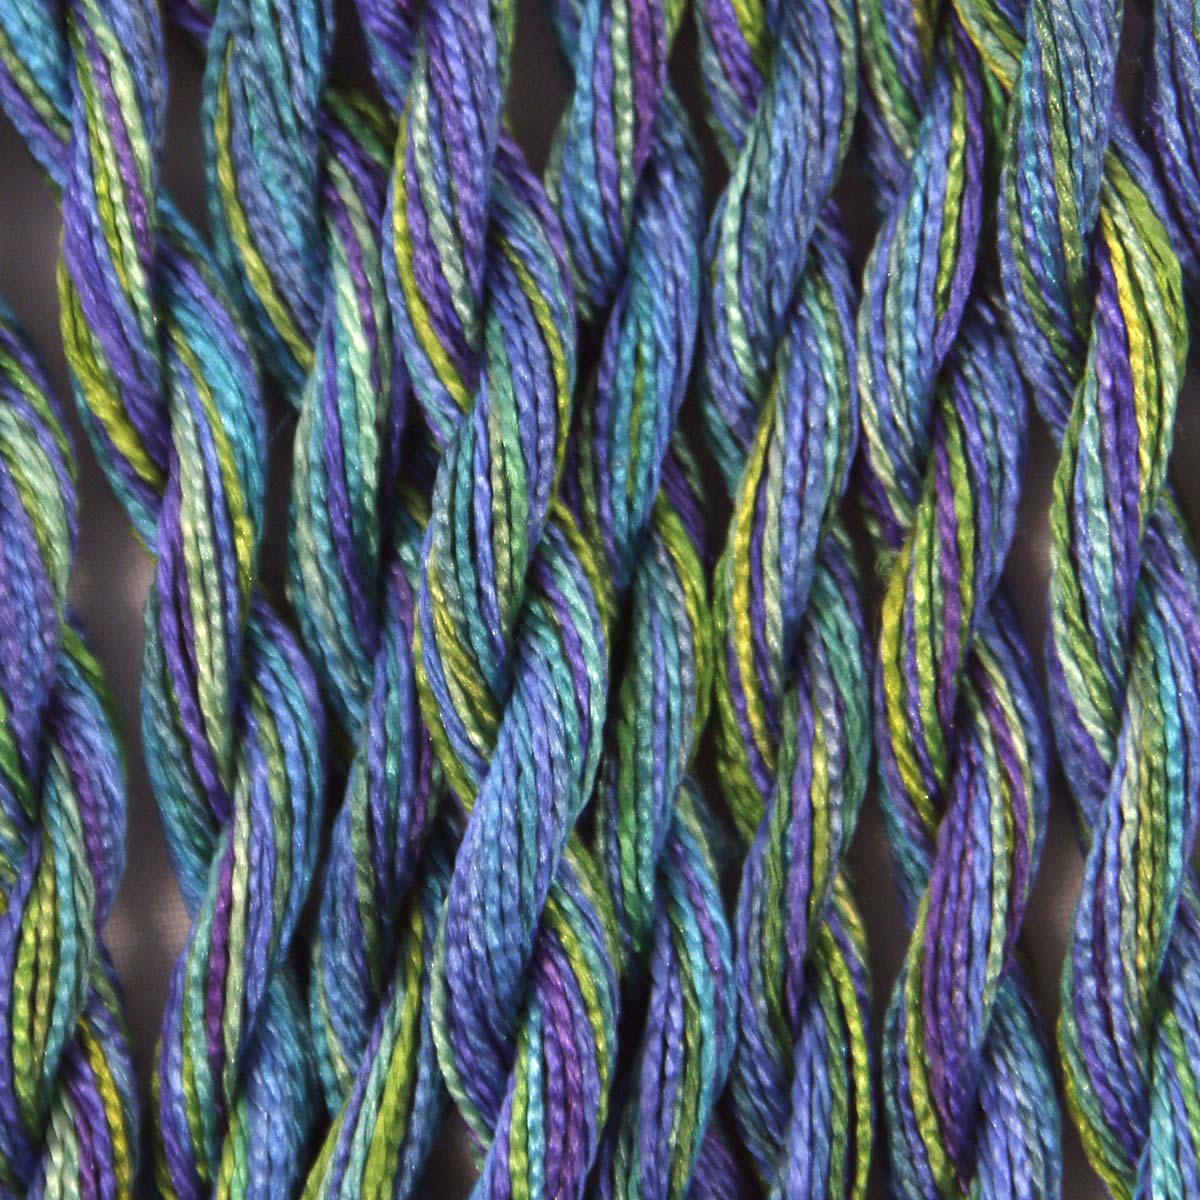 www.colourstreams.com.au Colour Streams Hand Dyed Silk Threads Silken Strands Ophir Exotic Lights Aurora Slow Stitch Embroidery Textile Arts Fibre DL 14 PUrples Greens Blues Golds 